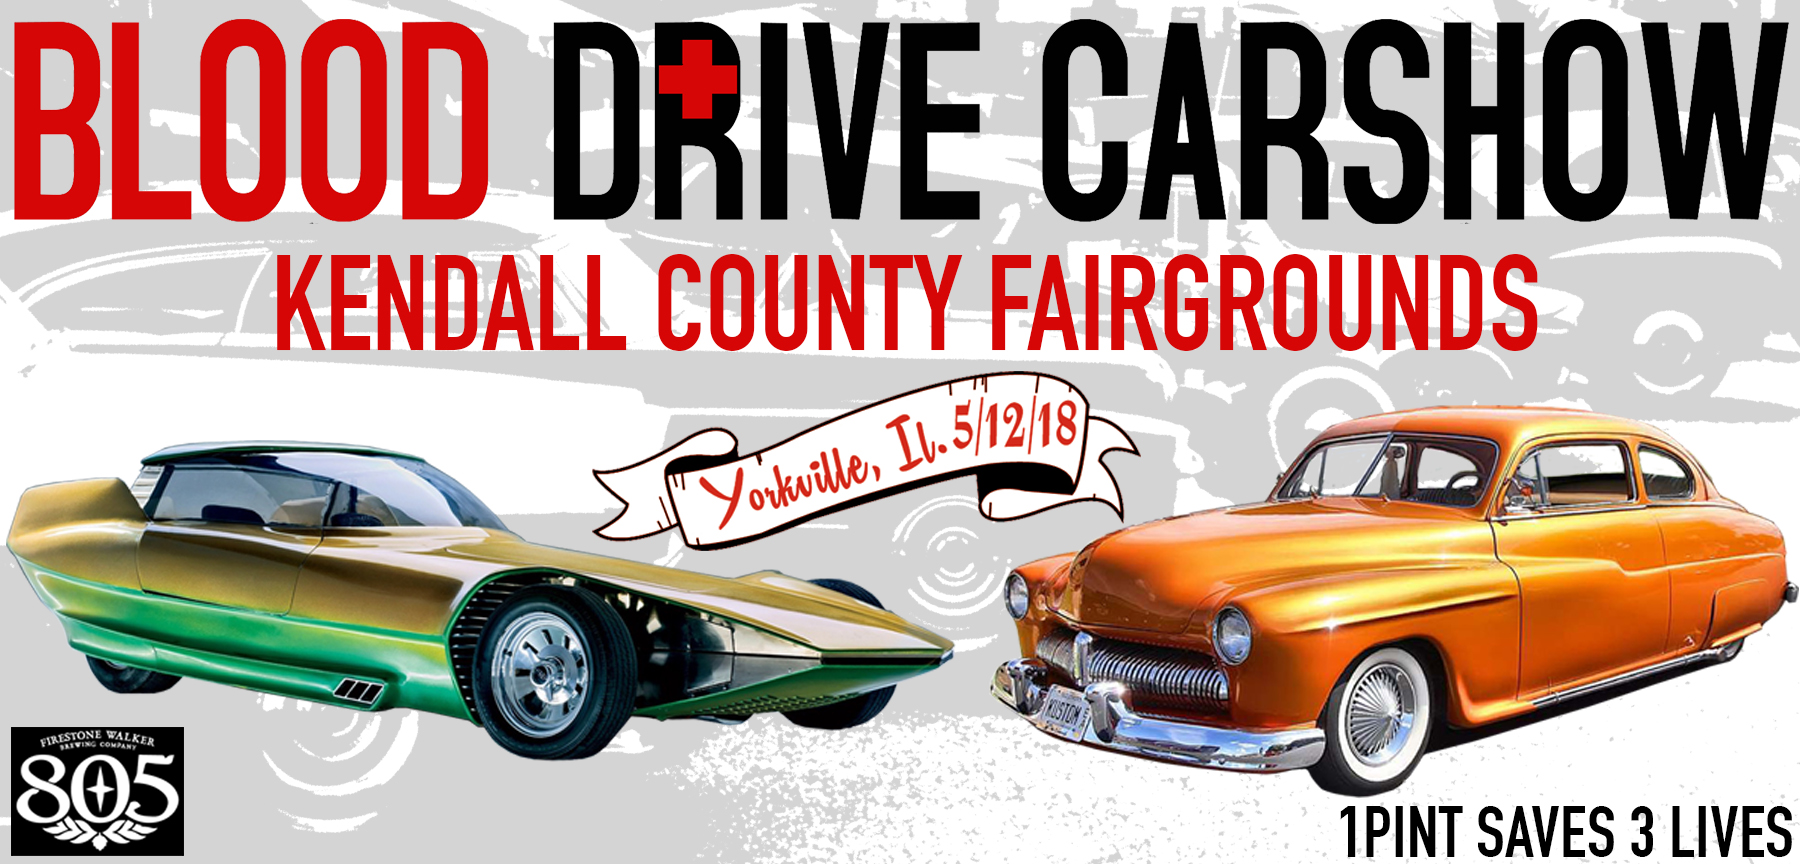 Blood Drive Carshow Comes to Yorkville, IL, Kendall County Fairgrounds ...